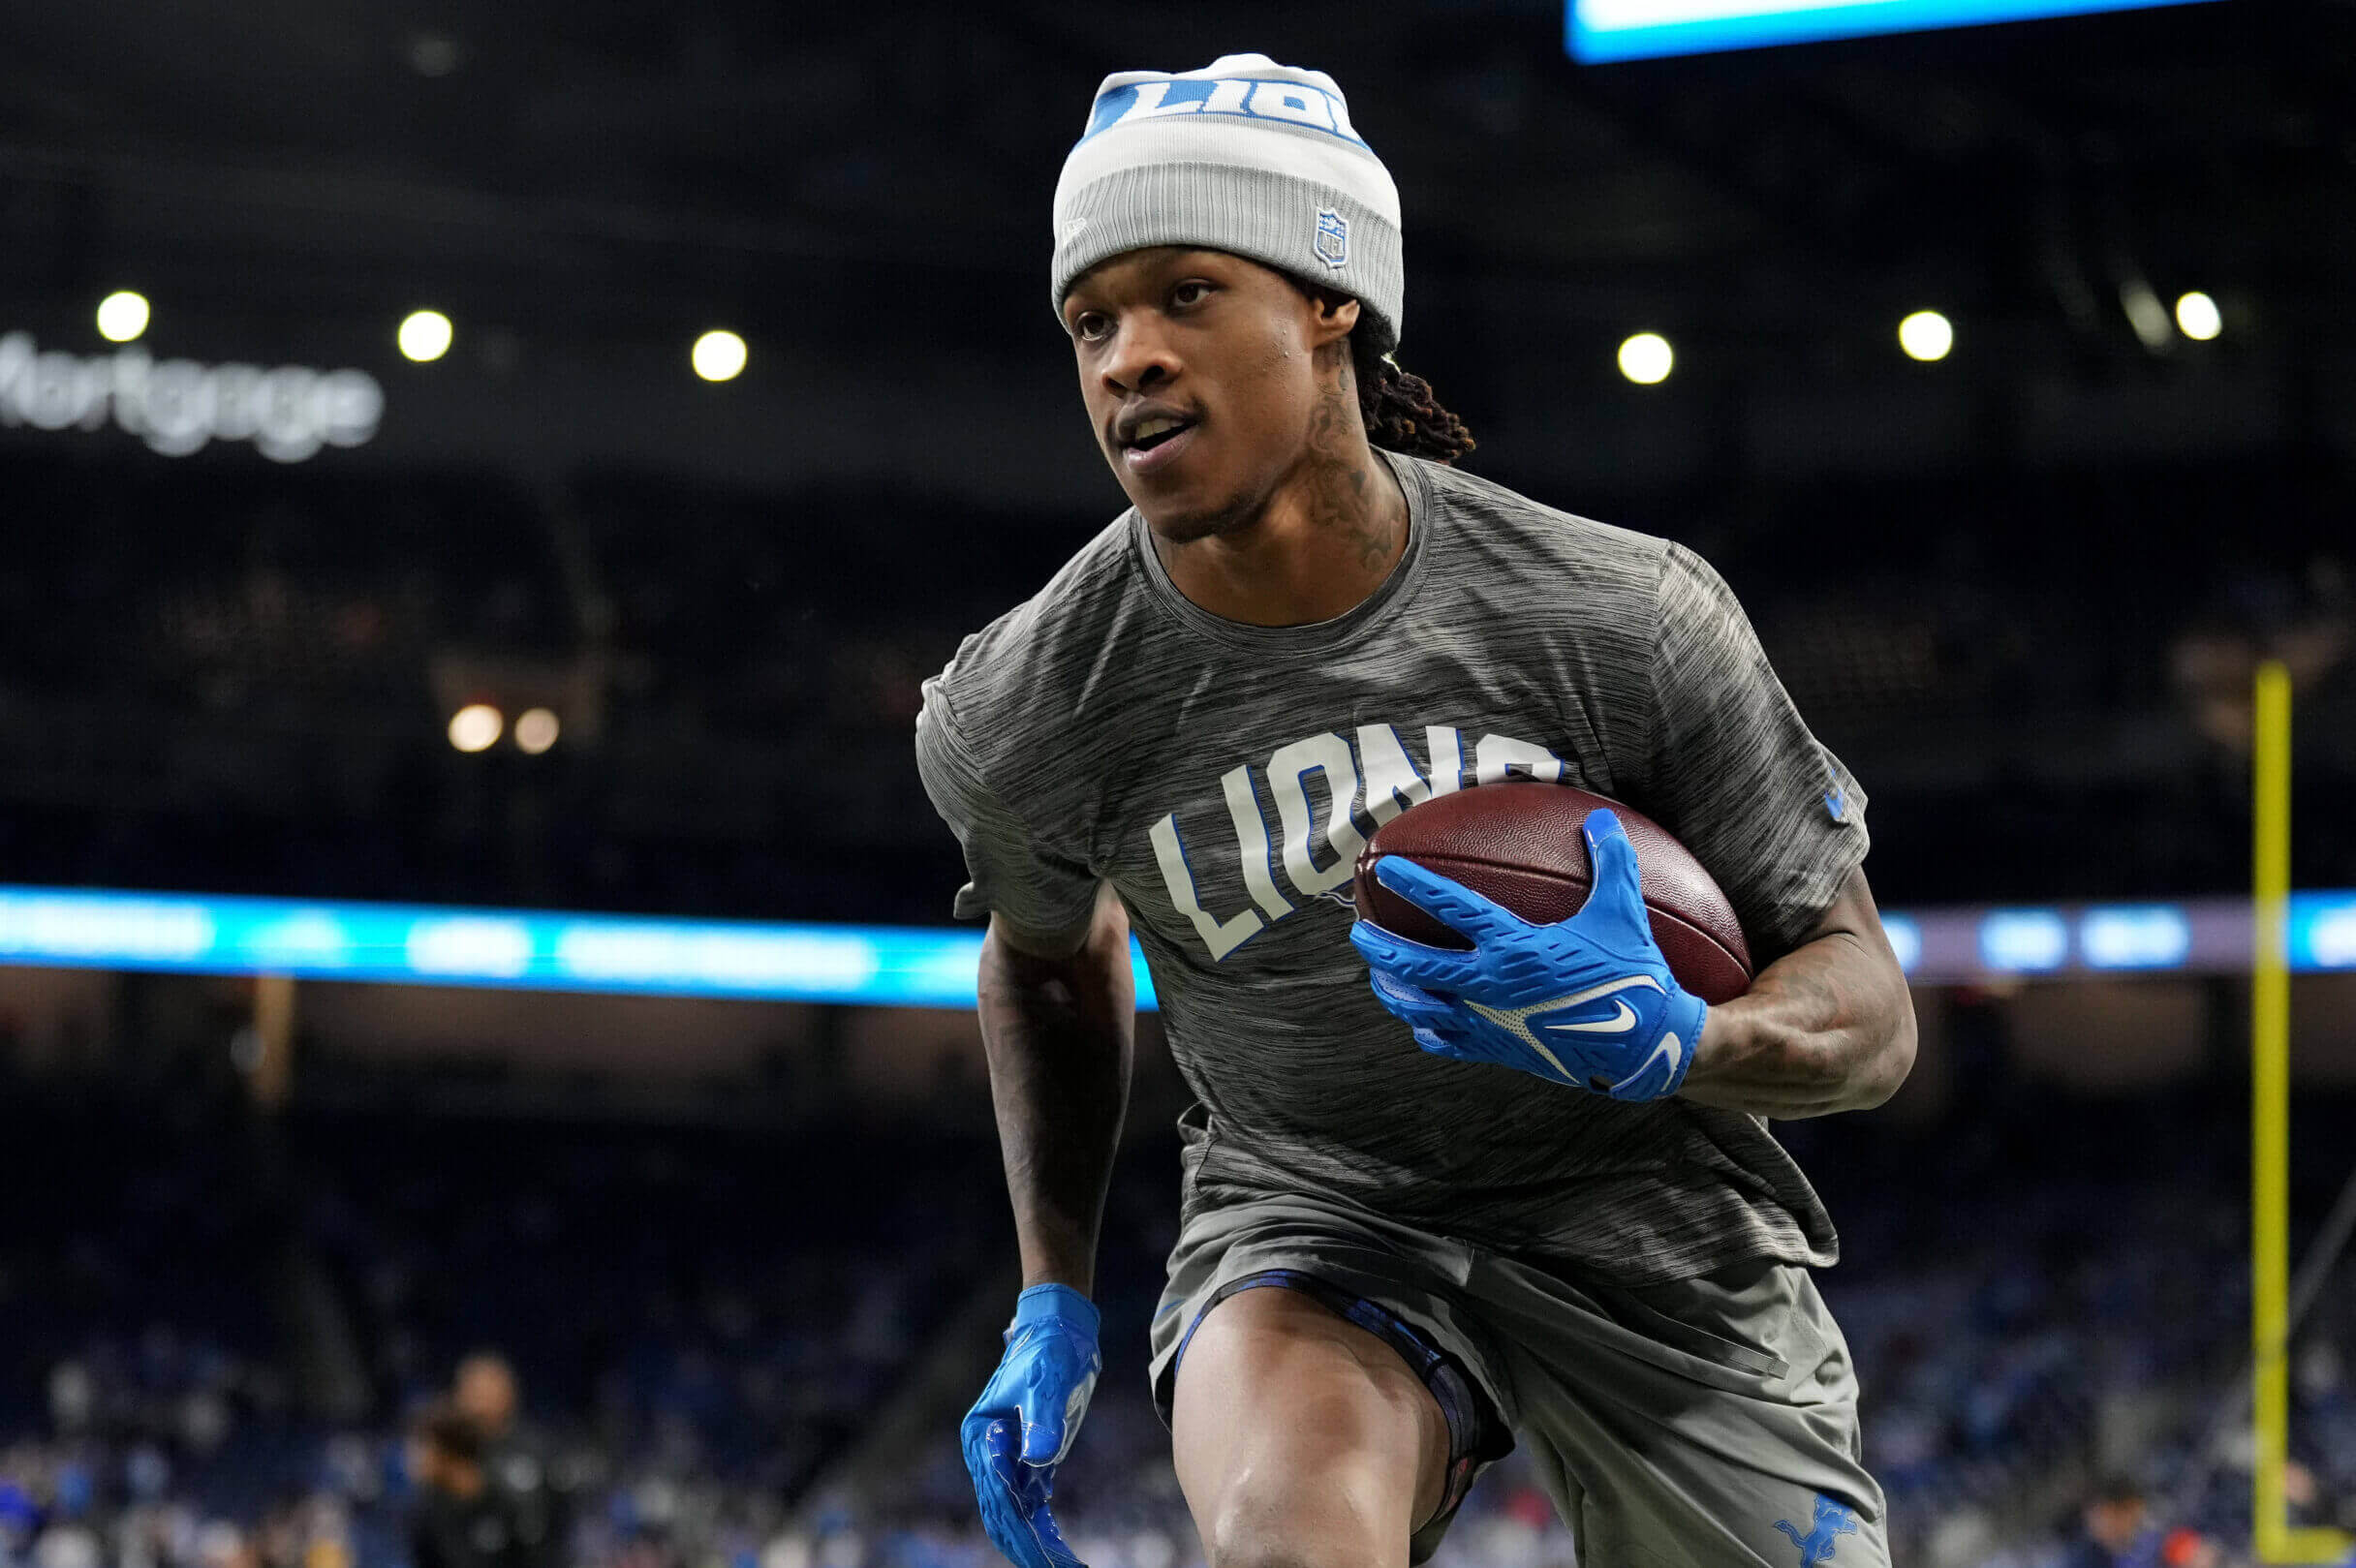 Players to watch at Lions OTAs: Carlton Davis III, Jameson Williams and the rookies